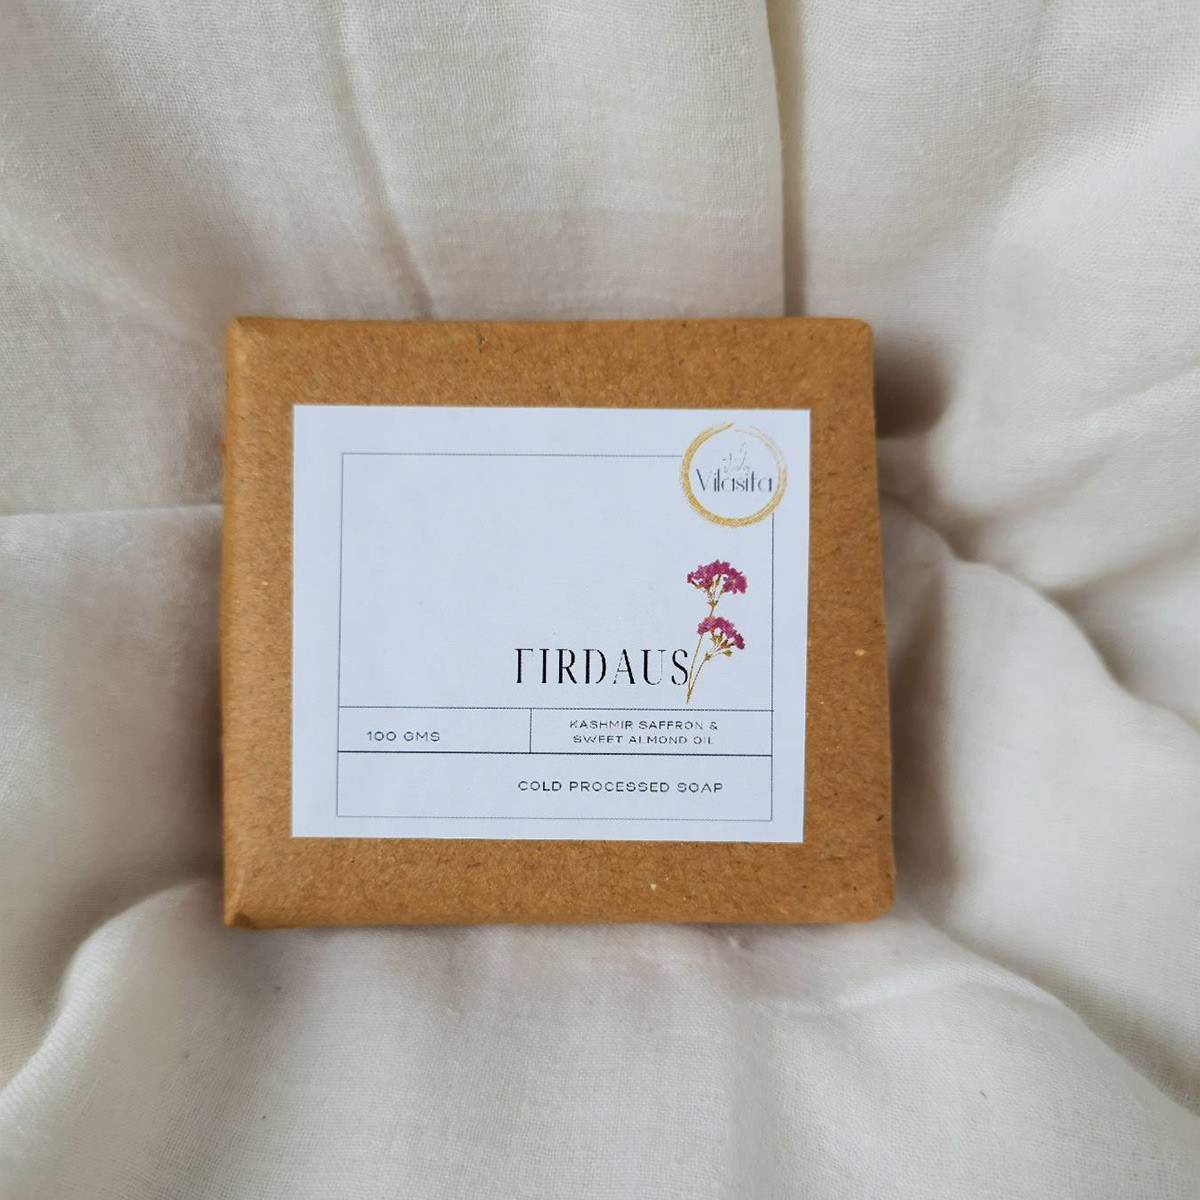 Firdaus (Cold-Pressed Soaps)